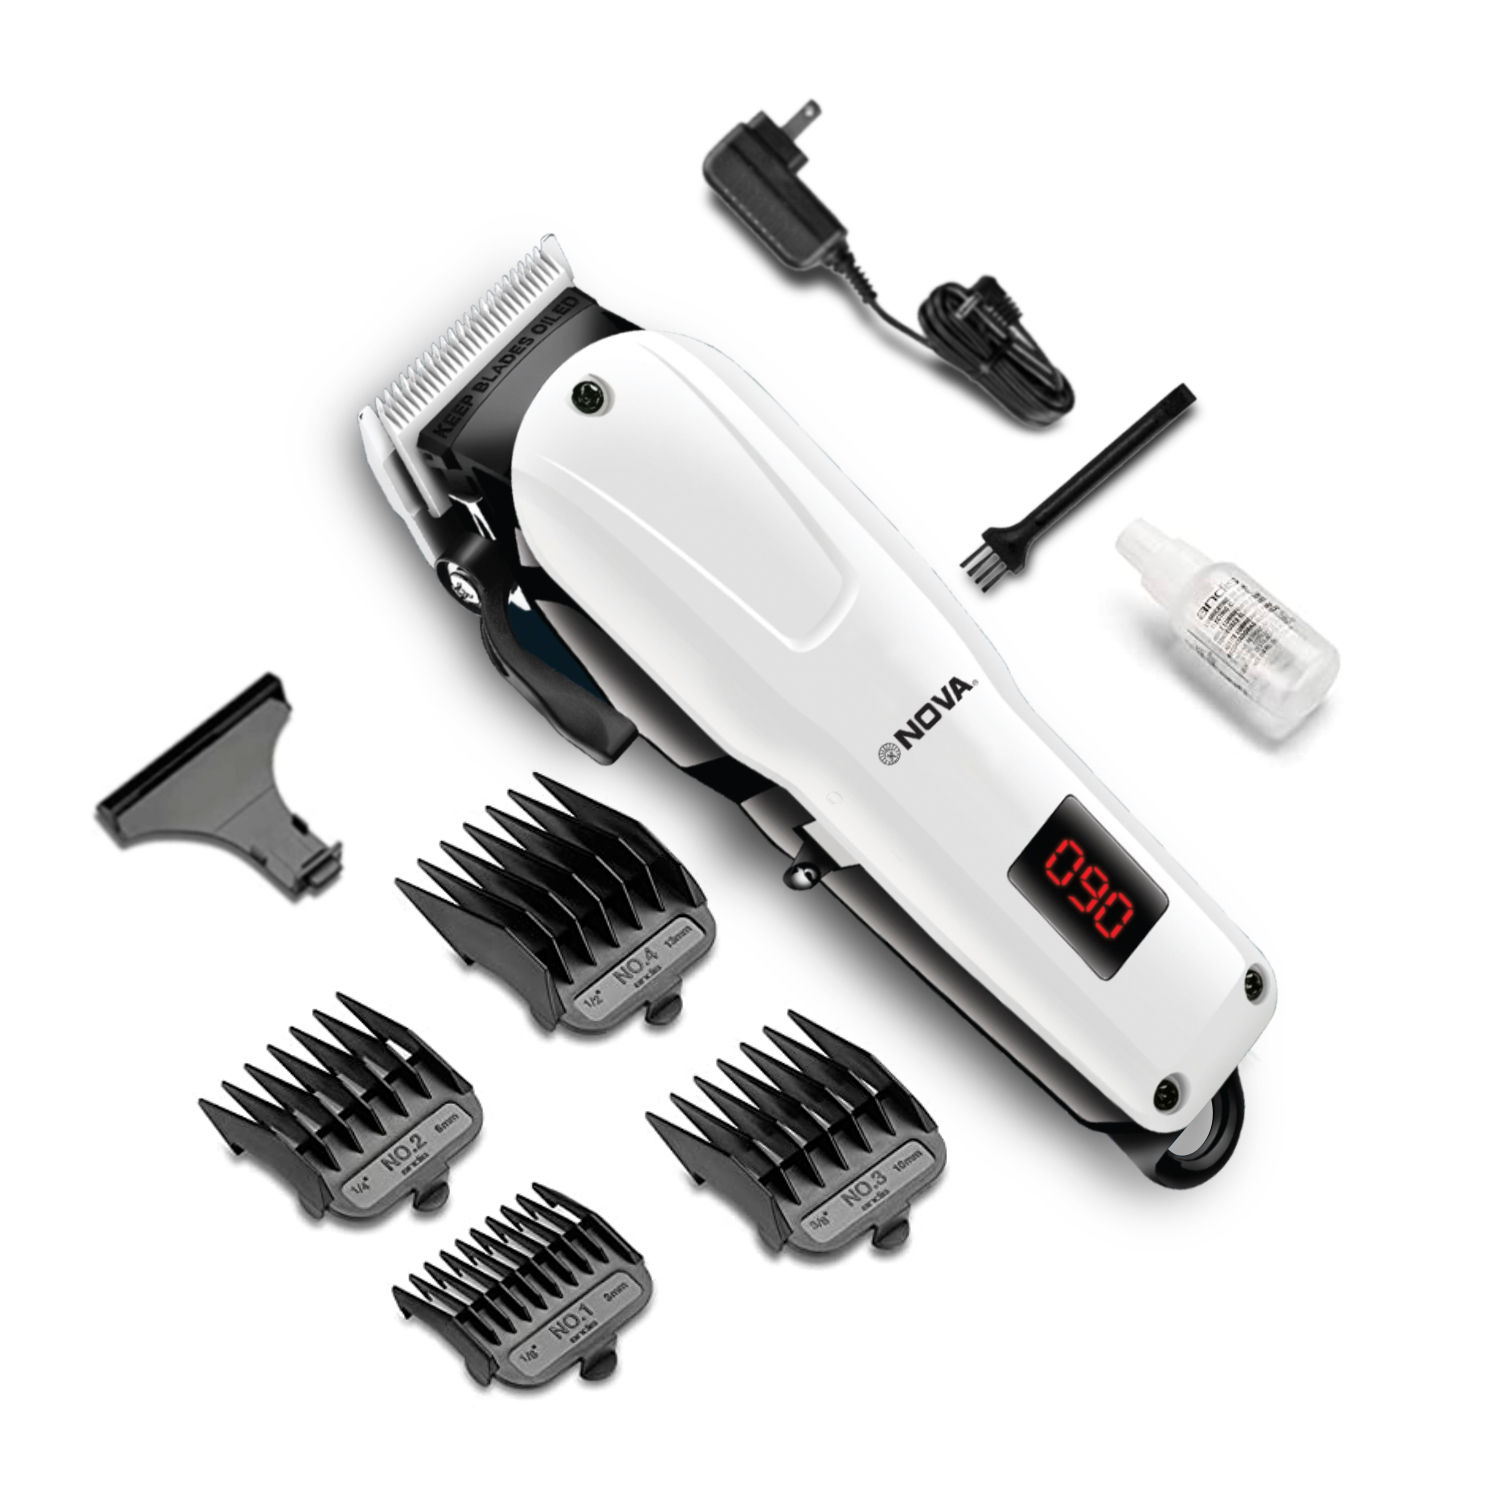 Nova Professional Rechargeable And Cordless NHT 1083 Hair Clipper Runtime:  120 Min Trimmer For Men: Buy Nova Professional Rechargeable And Cordless  NHT 1083 Hair Clipper Runtime: 120 Min Trimmer For Men Online